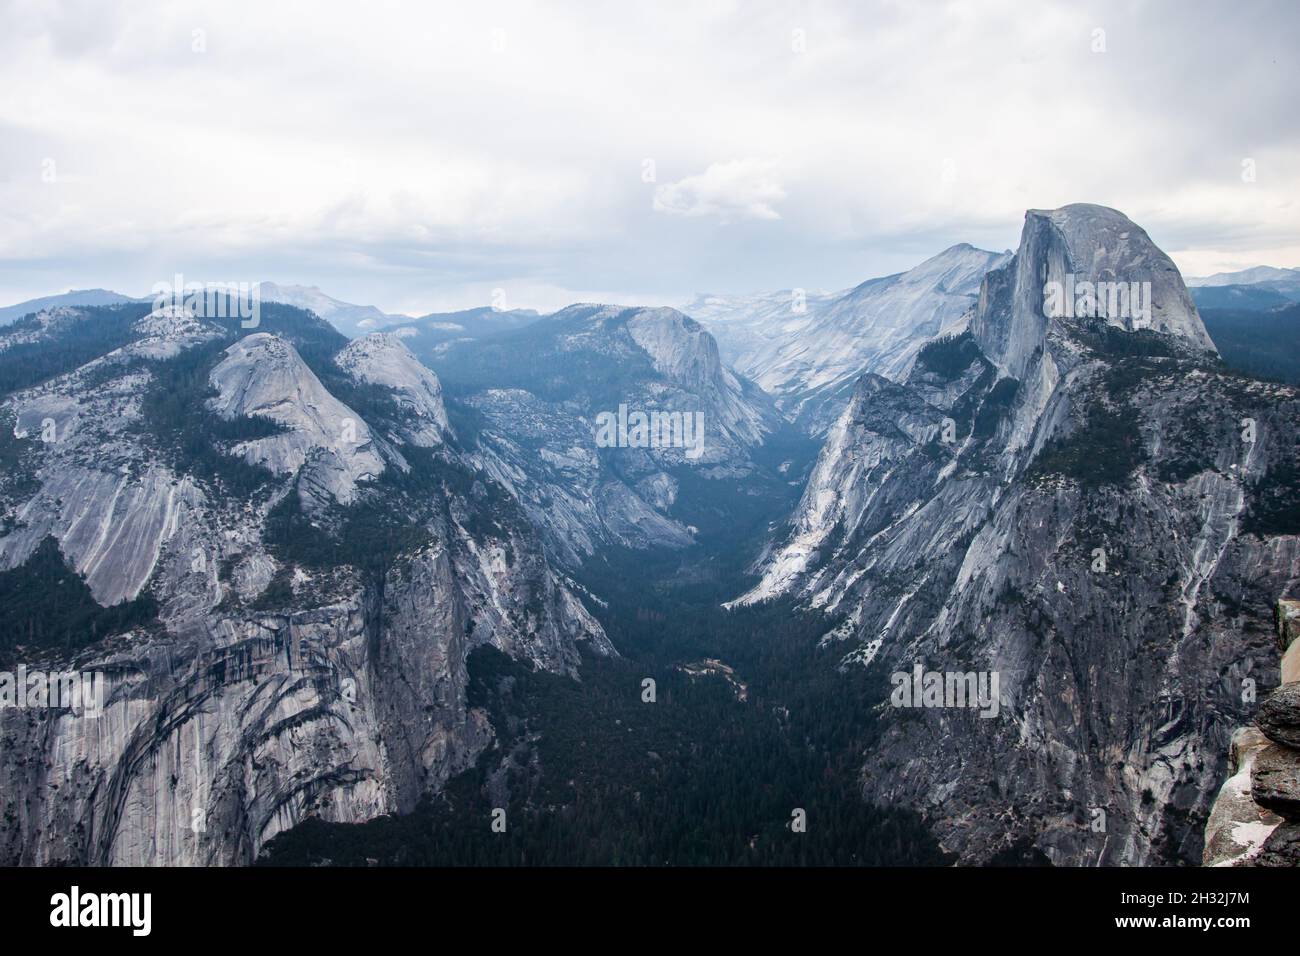 Half Dome seen from Glacier Point in Yosemite Valley | Stunning views in Yosemite National Park, California Amazing rock formations, Mountains, Cliffs Stock Photo